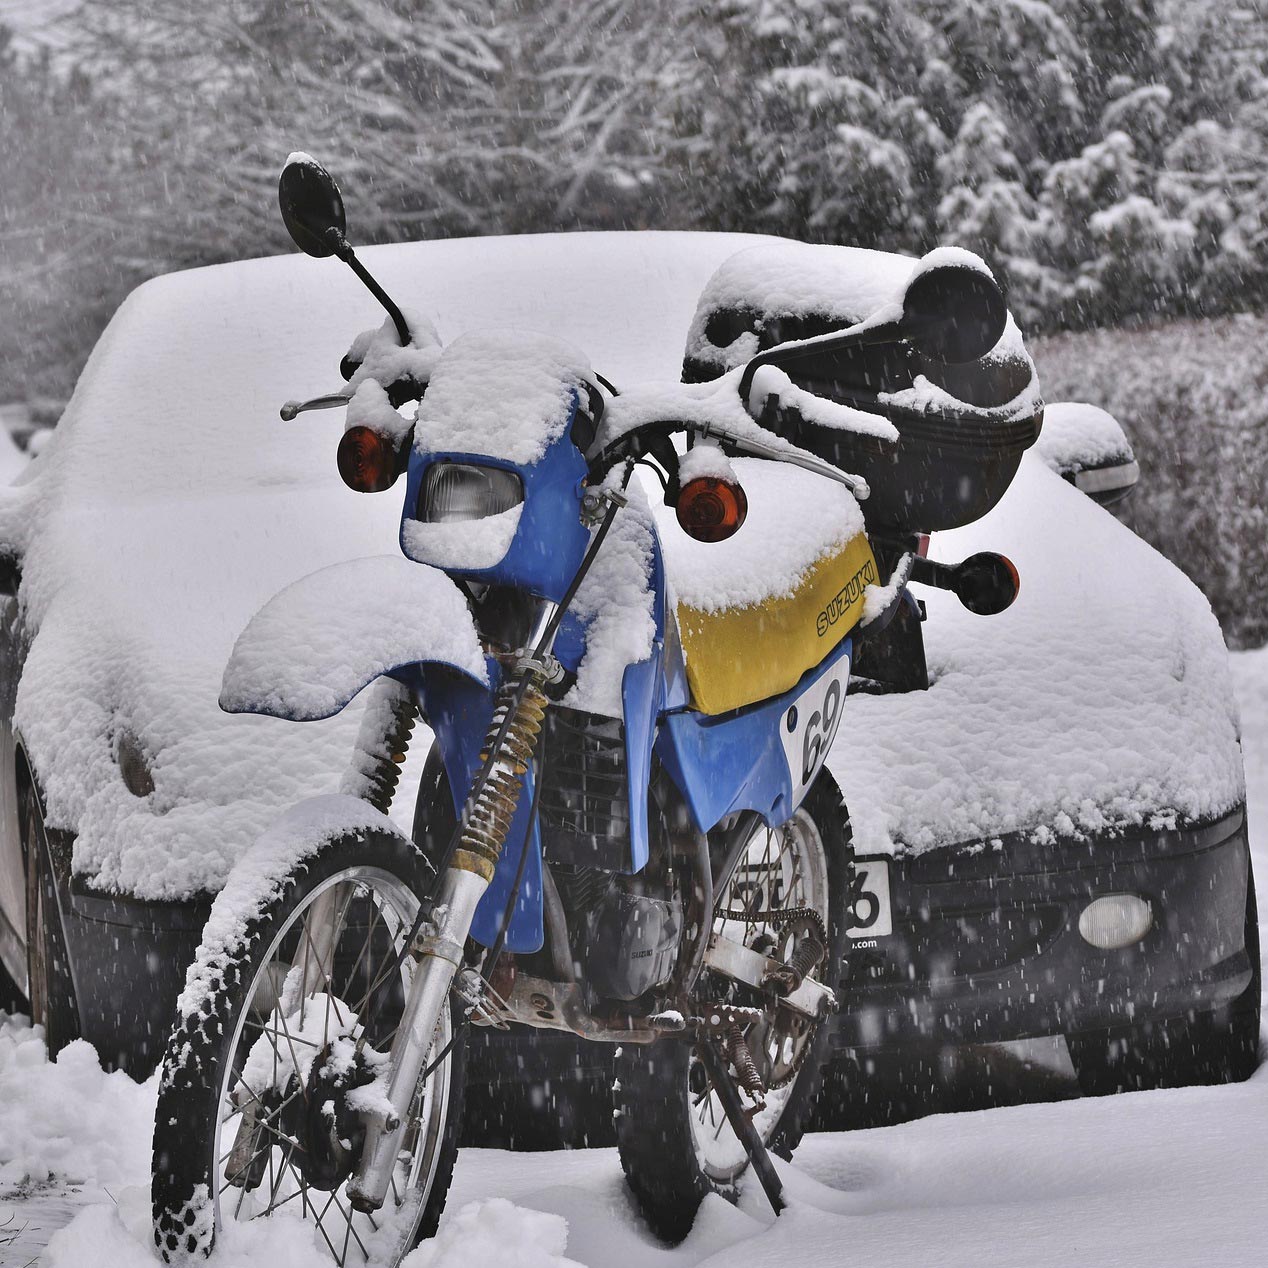 9 Tips For Winter Motorcycling Safety